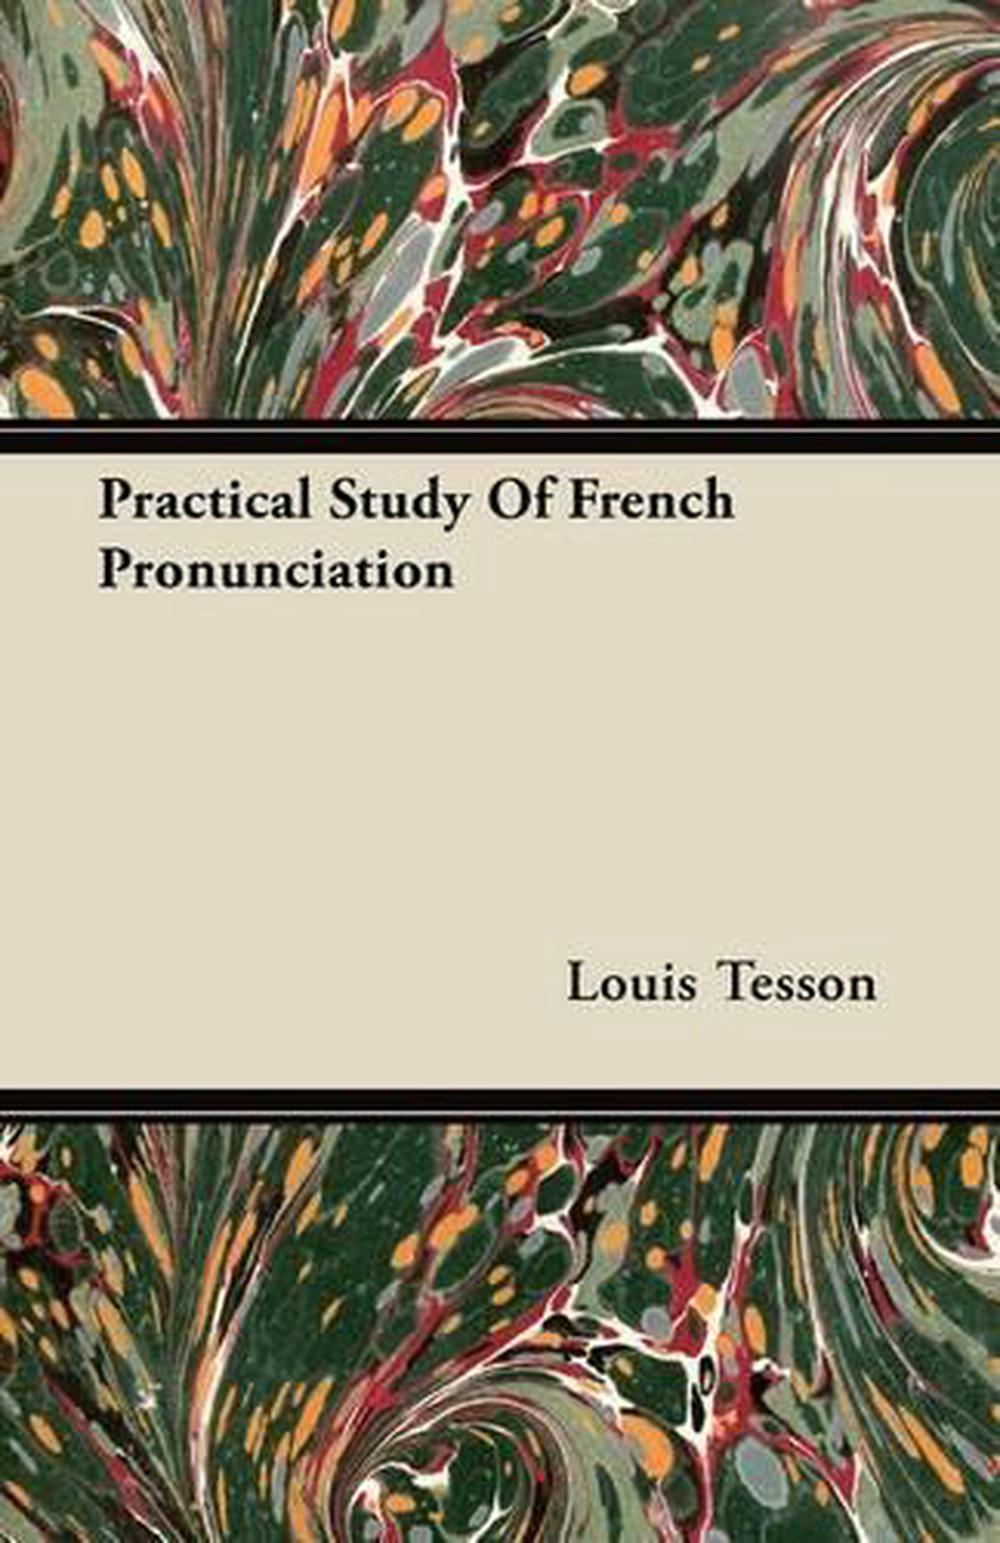 Practical Study of French Pronunciation by Louis Tesson (English) Paperback Book 9781446073087 ...